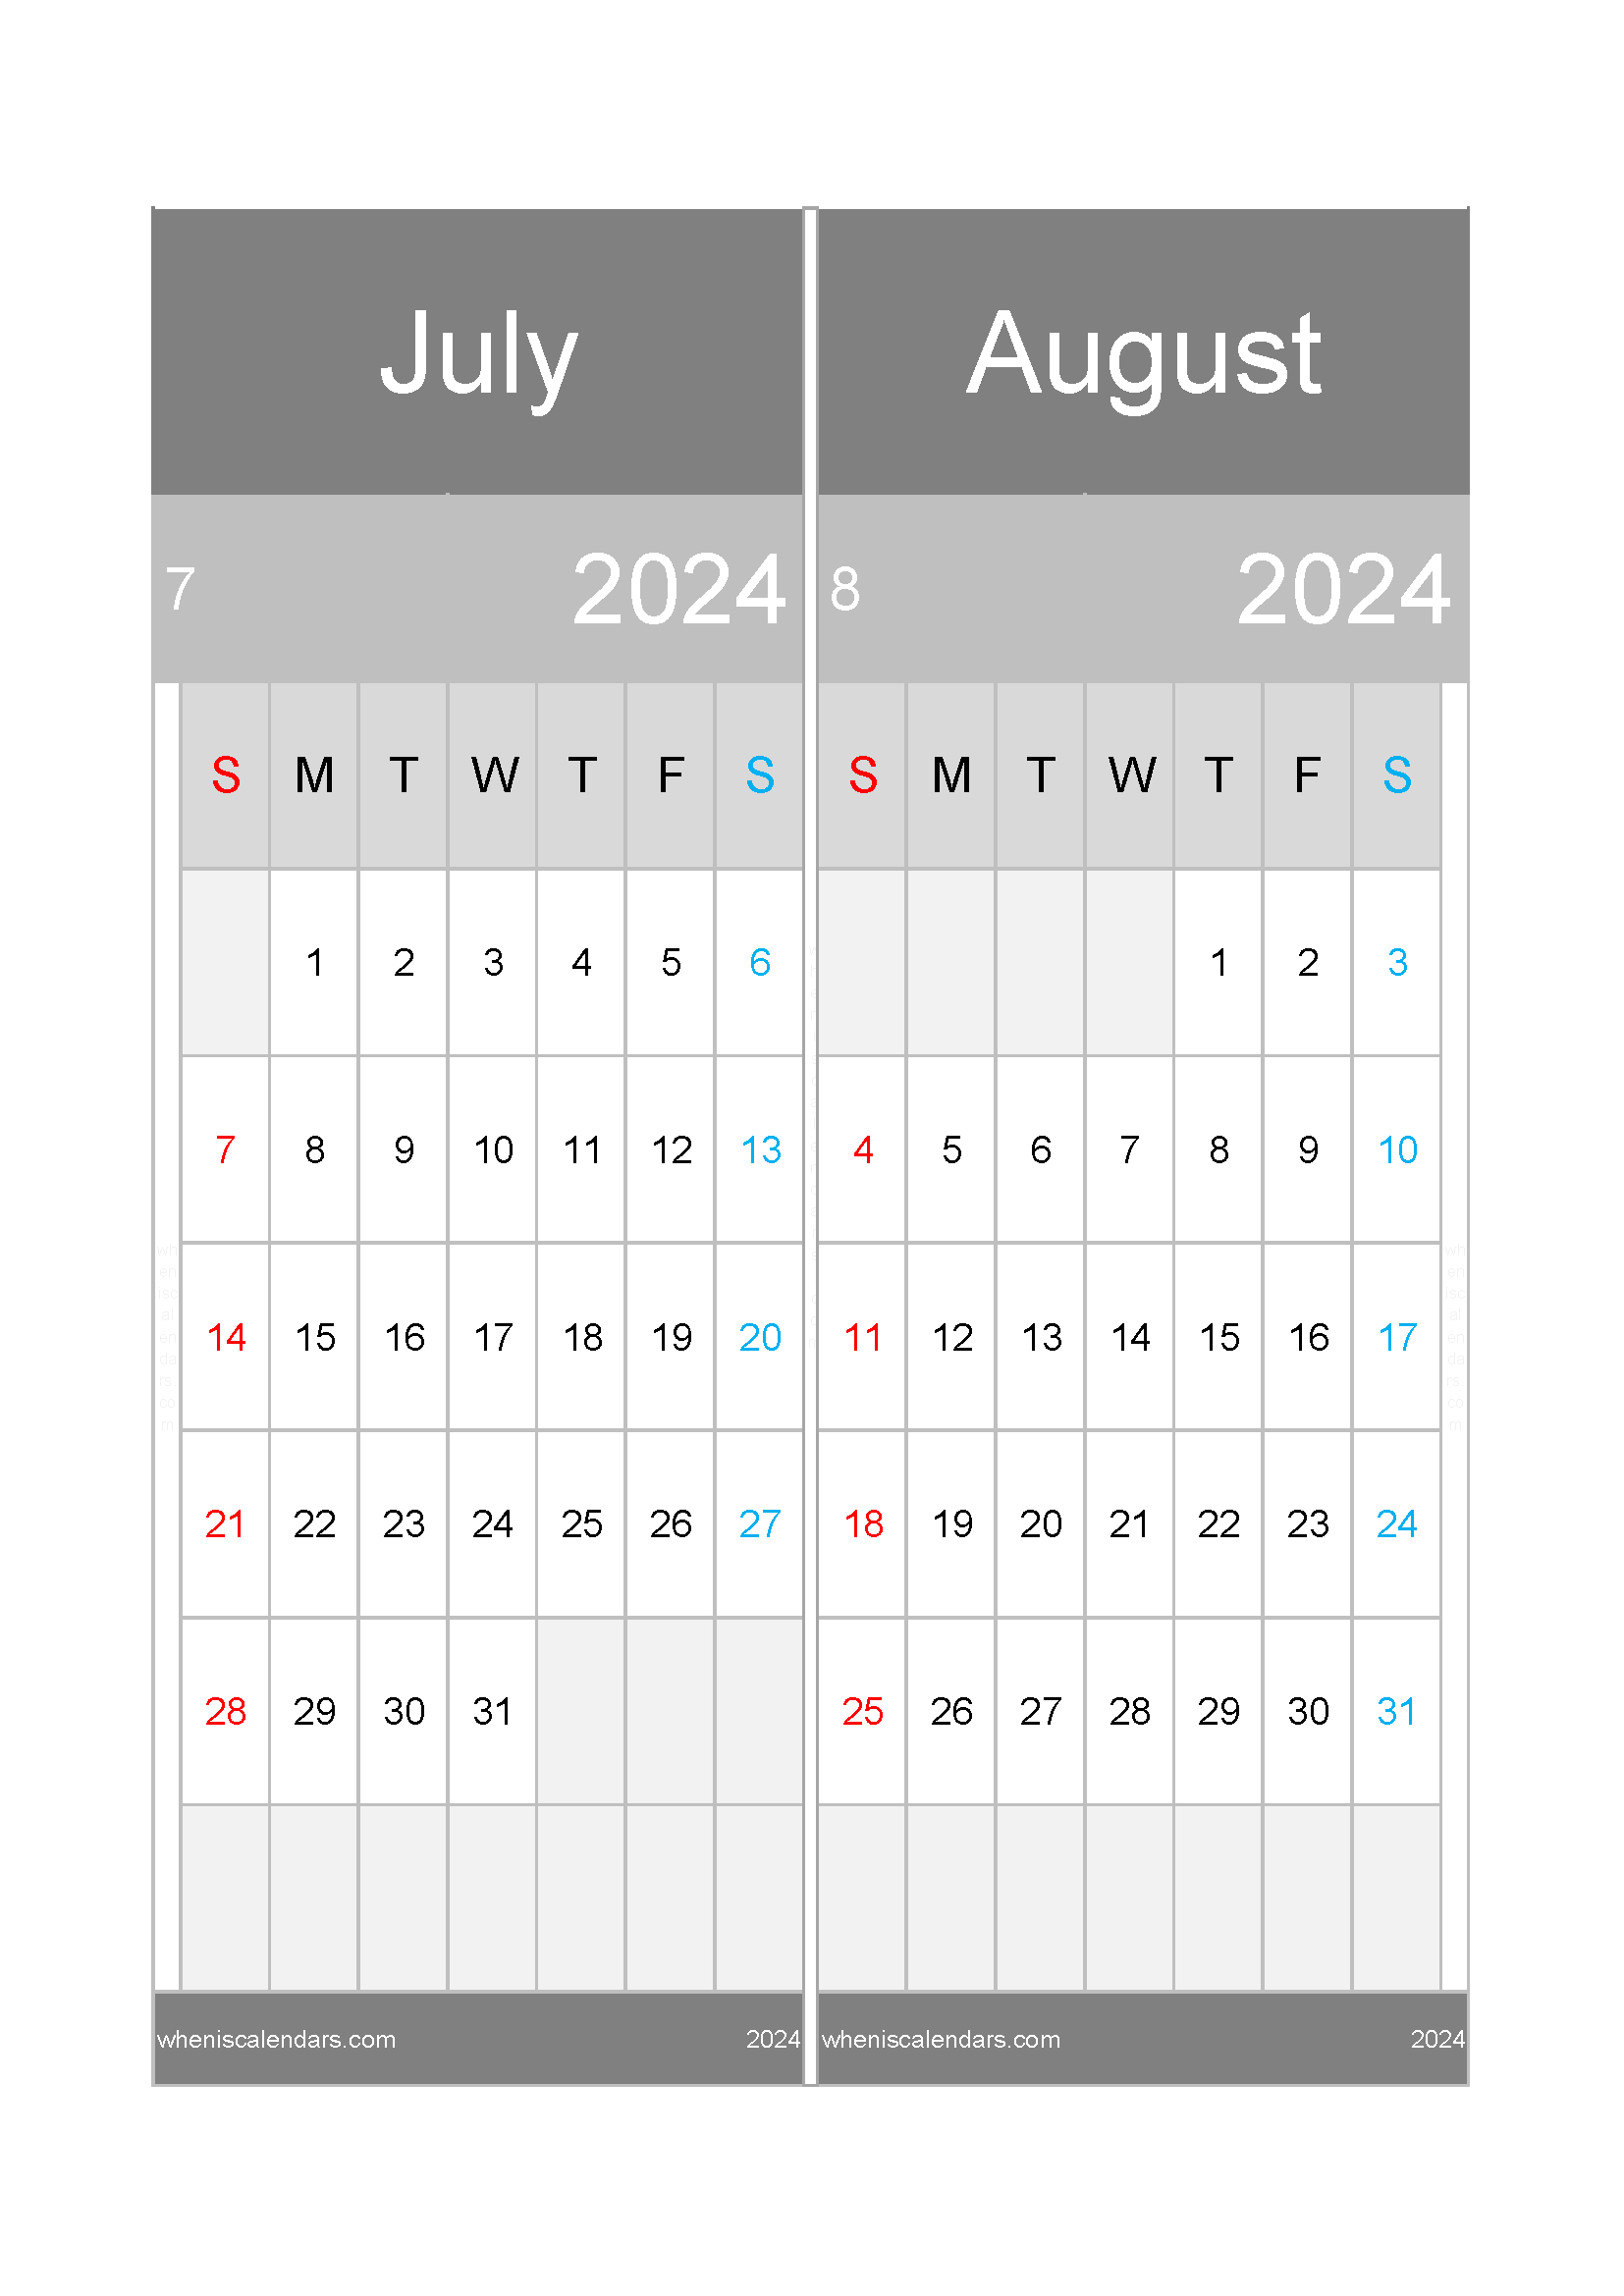 Download calendar for July and August 2024 A4 JA24019